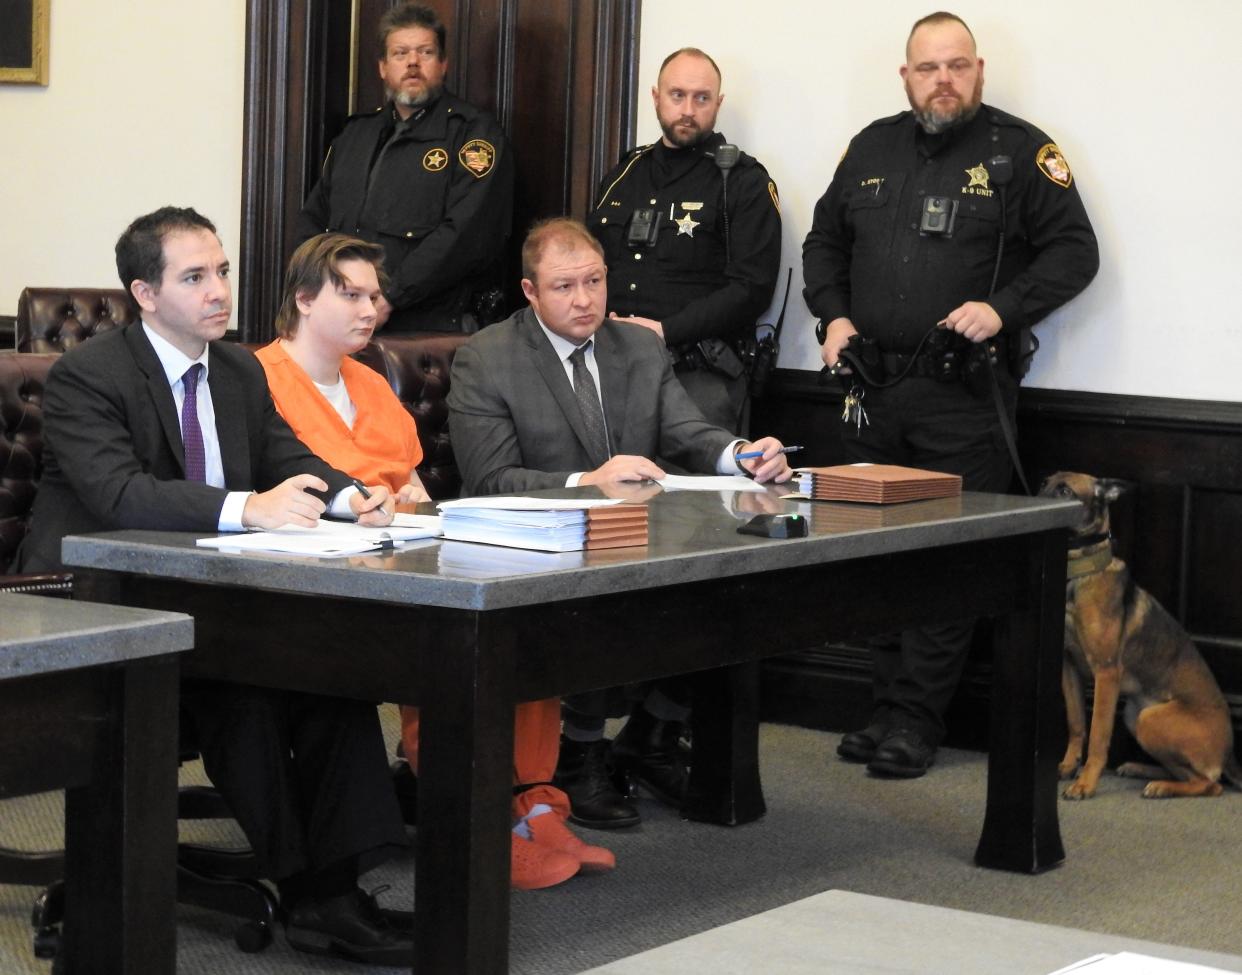 Blake Grewell, flanked by attorneys Edward Itayim and Zachuary Meranda, was sentenced to life in prison without the possibility of parole on Wednesday. in Coshocton County Common Pleas Court for the murder of Brianna Ratliff.